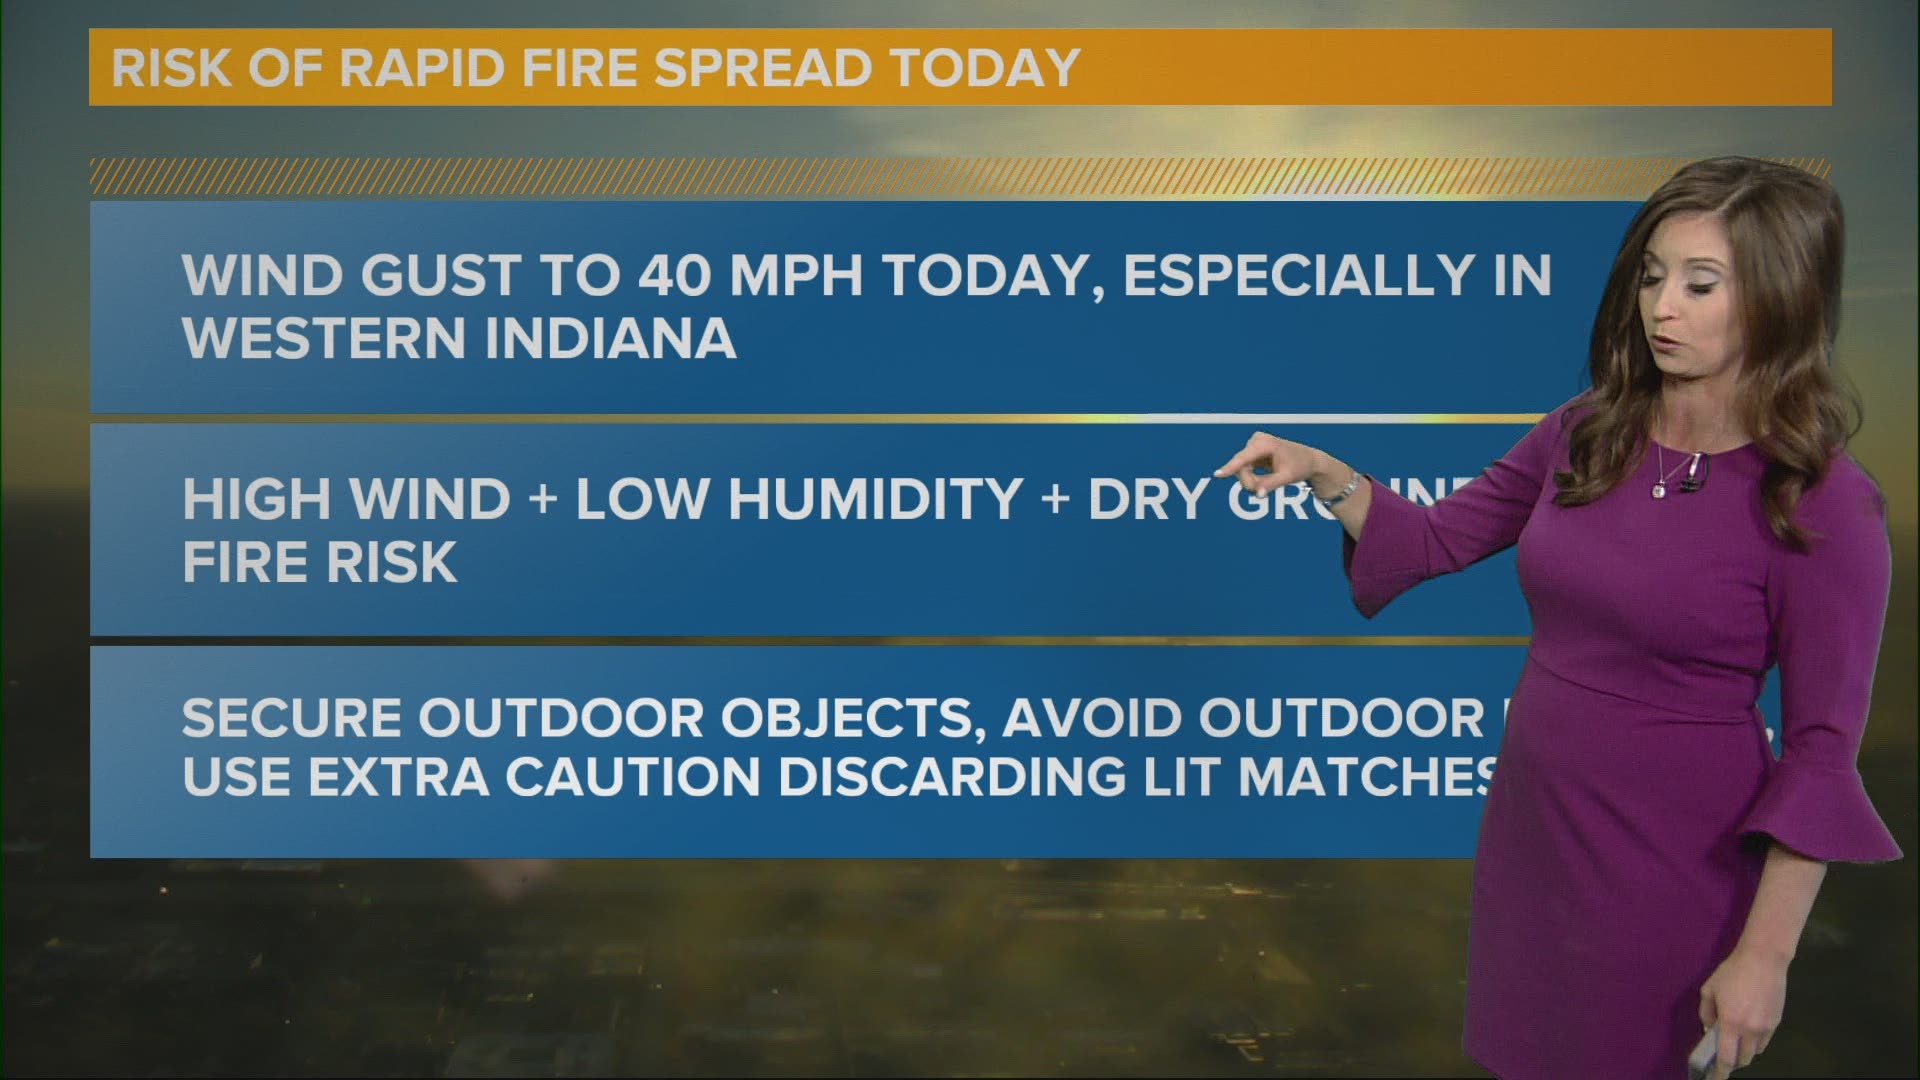 A Red Flag Warning means no outdoor burning due to high risk of spreading fire.